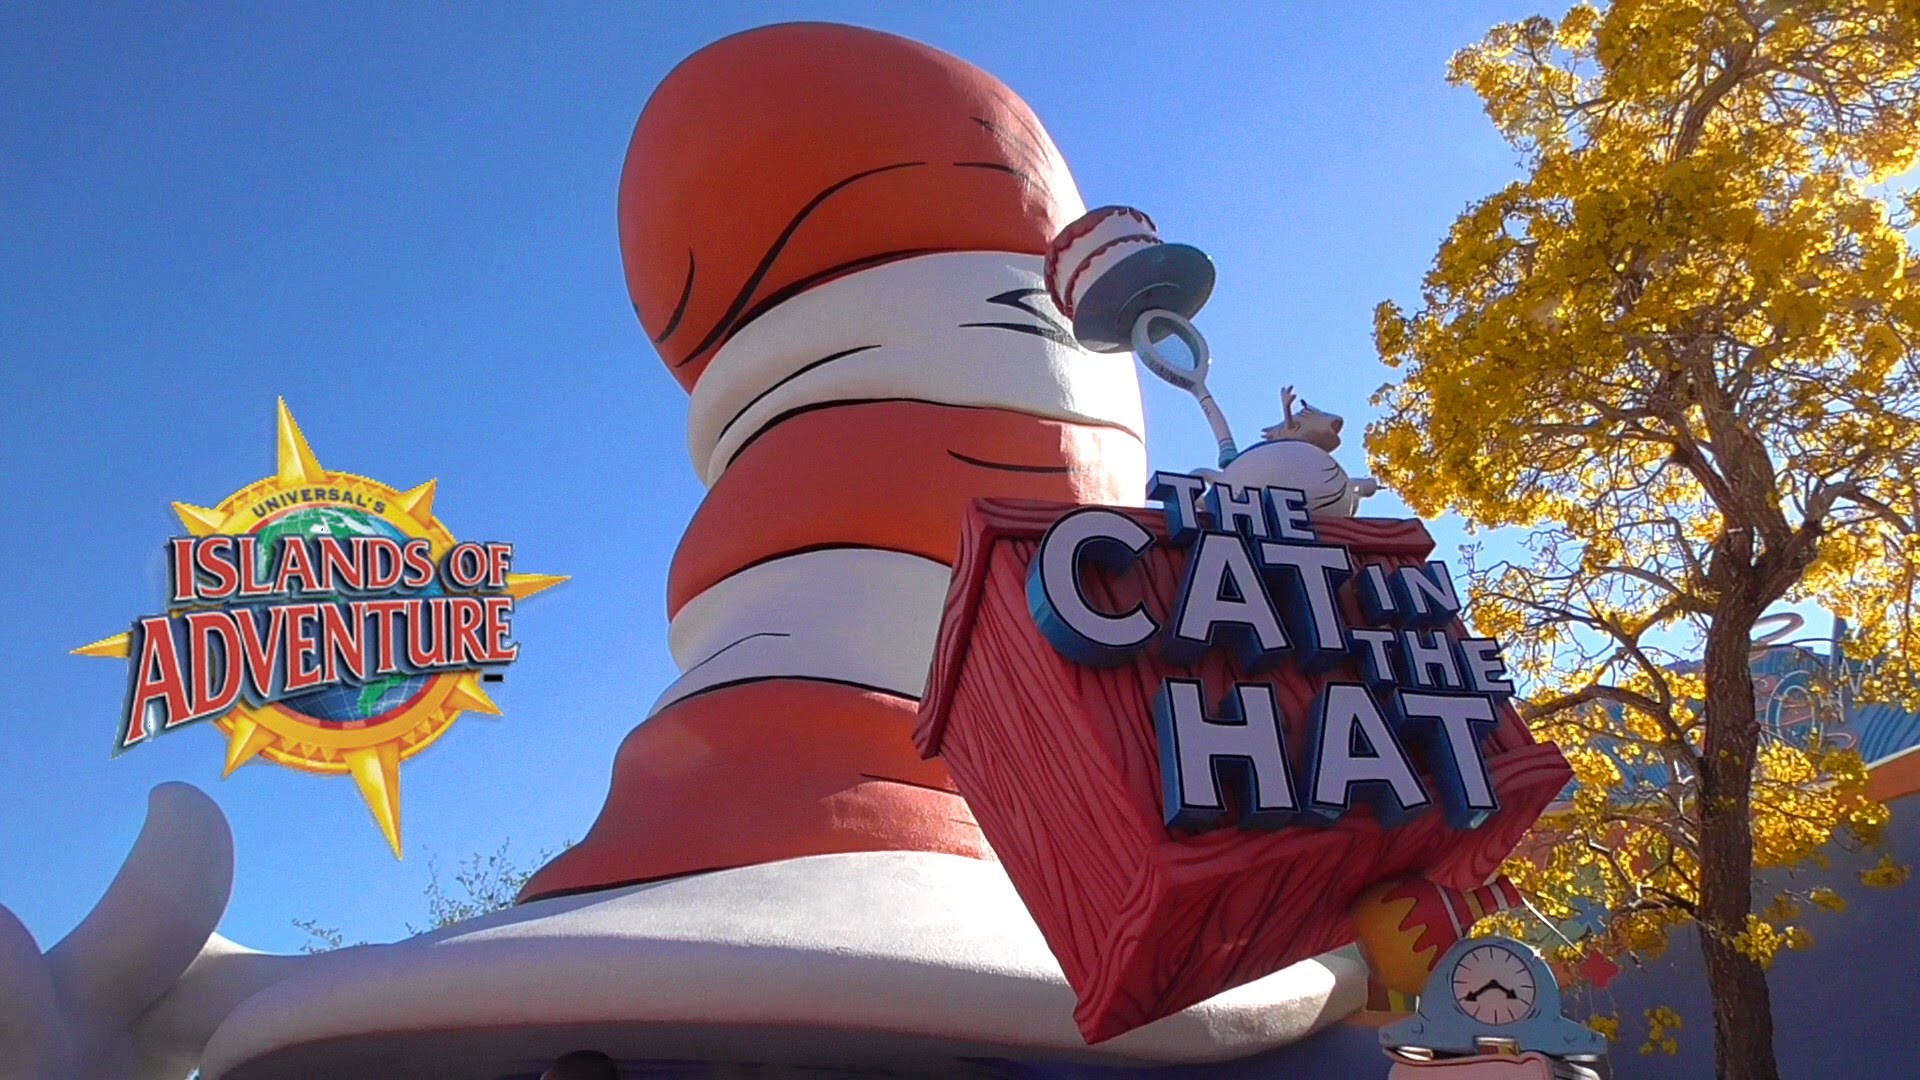 1920x1080 The Cat in the Hat Ride at Universal's Islands of Adventure - On-Ride Video  - YouTube